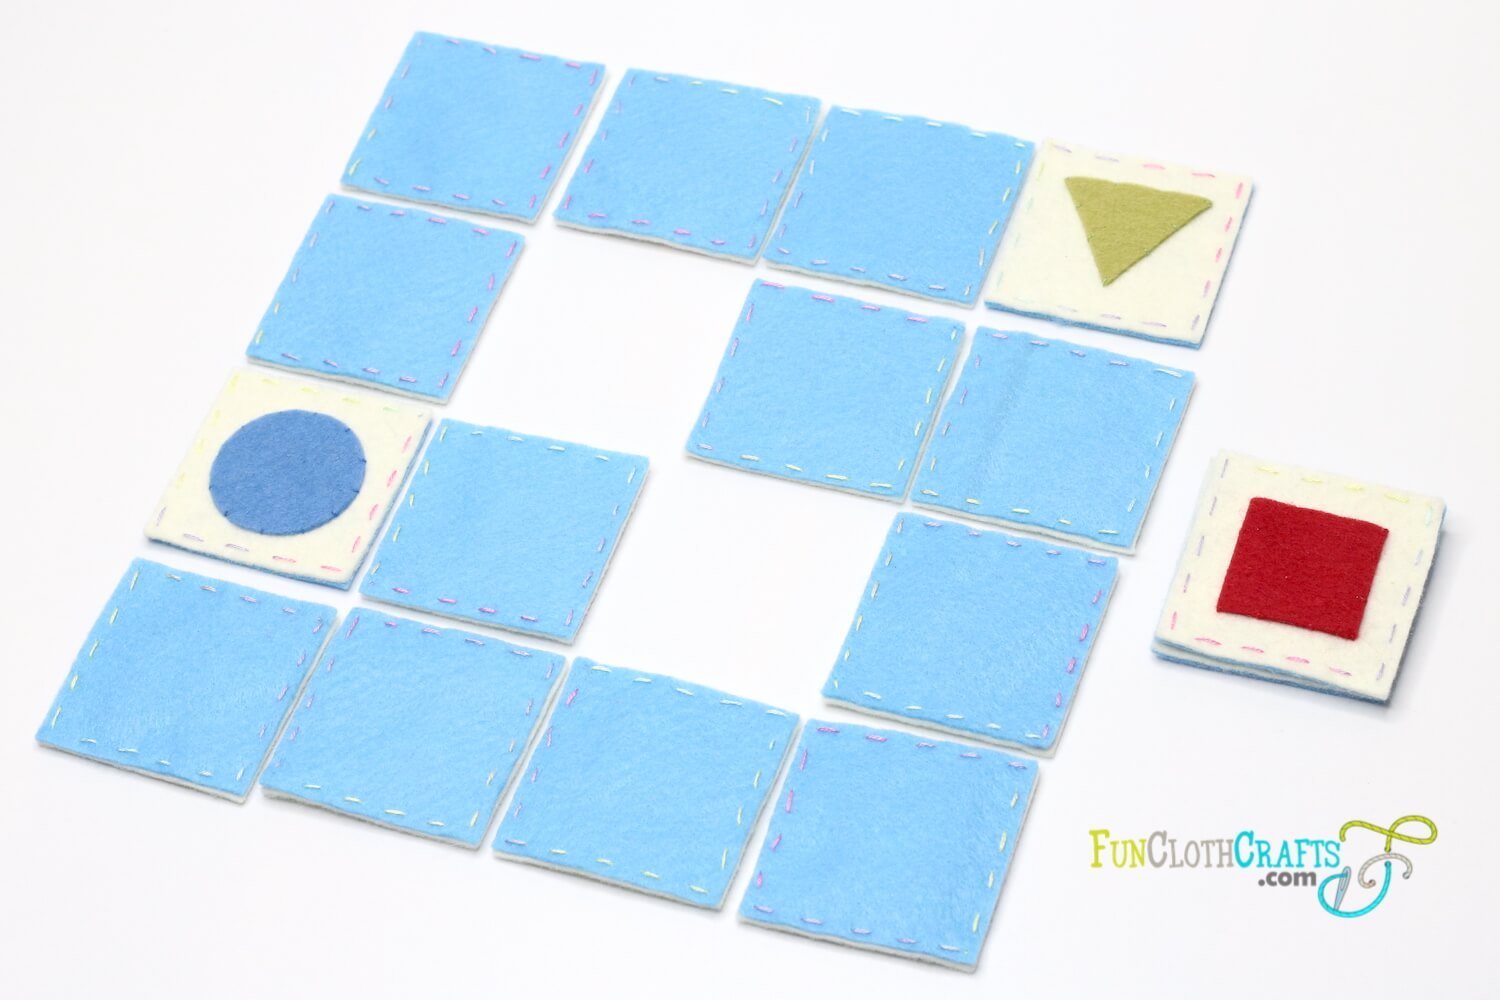 Felt Shape Wooden Matching Memory Game - Spouse-ly